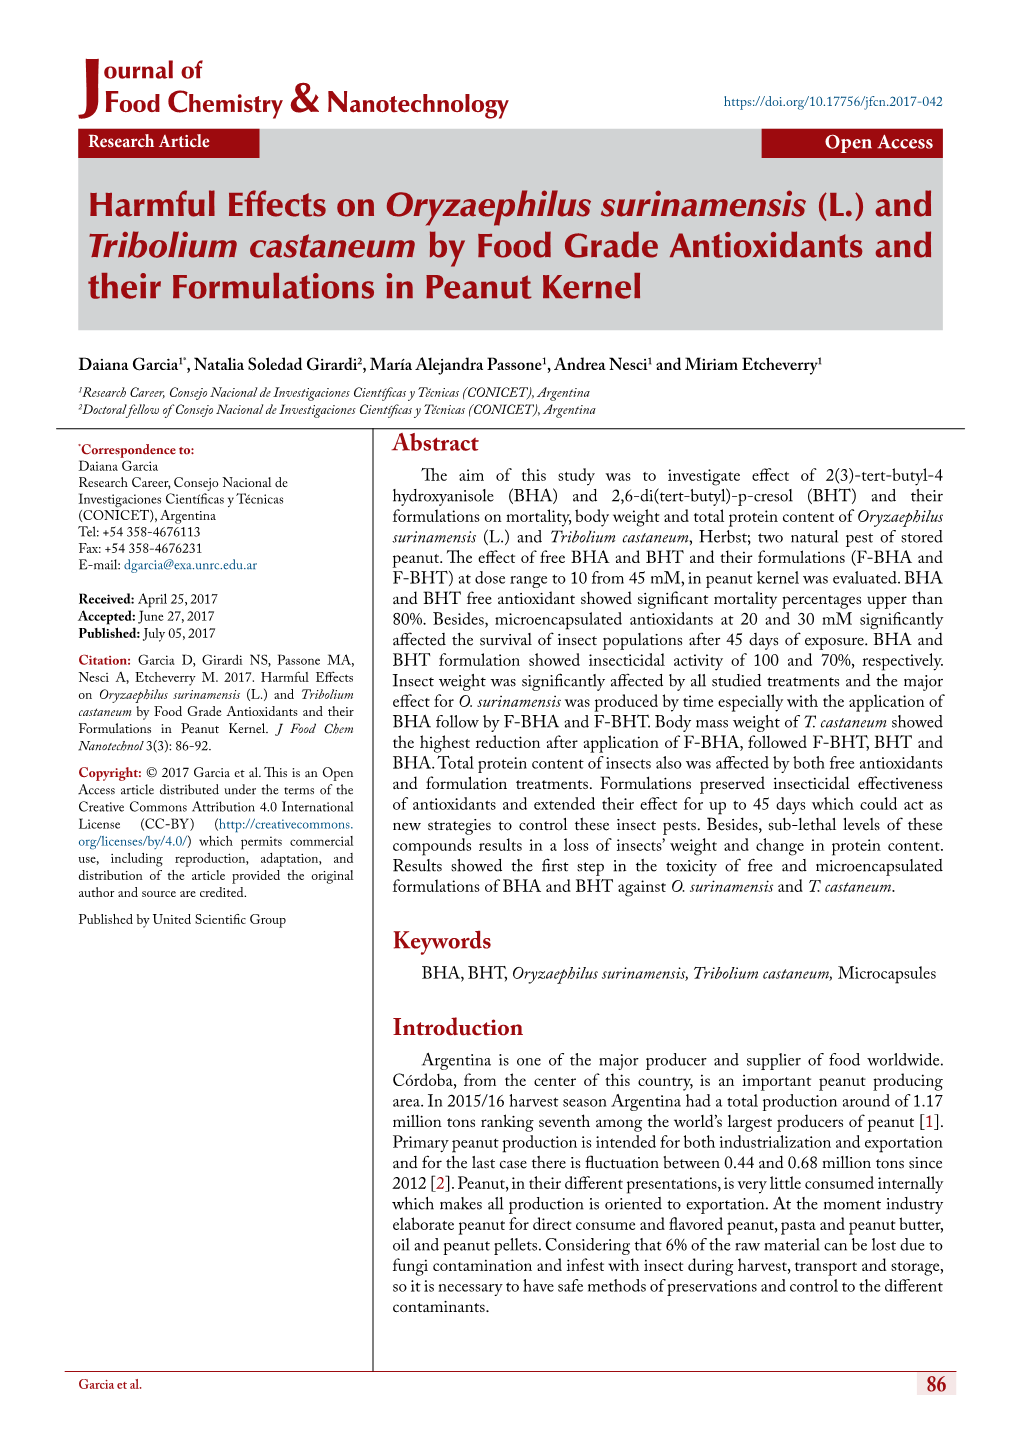 Harmful Effects on Oryzaephilus Surinamensis (L.) and Tribolium Castaneum by Food Grade Antioxidants and Their Formulations in Peanut Kernel